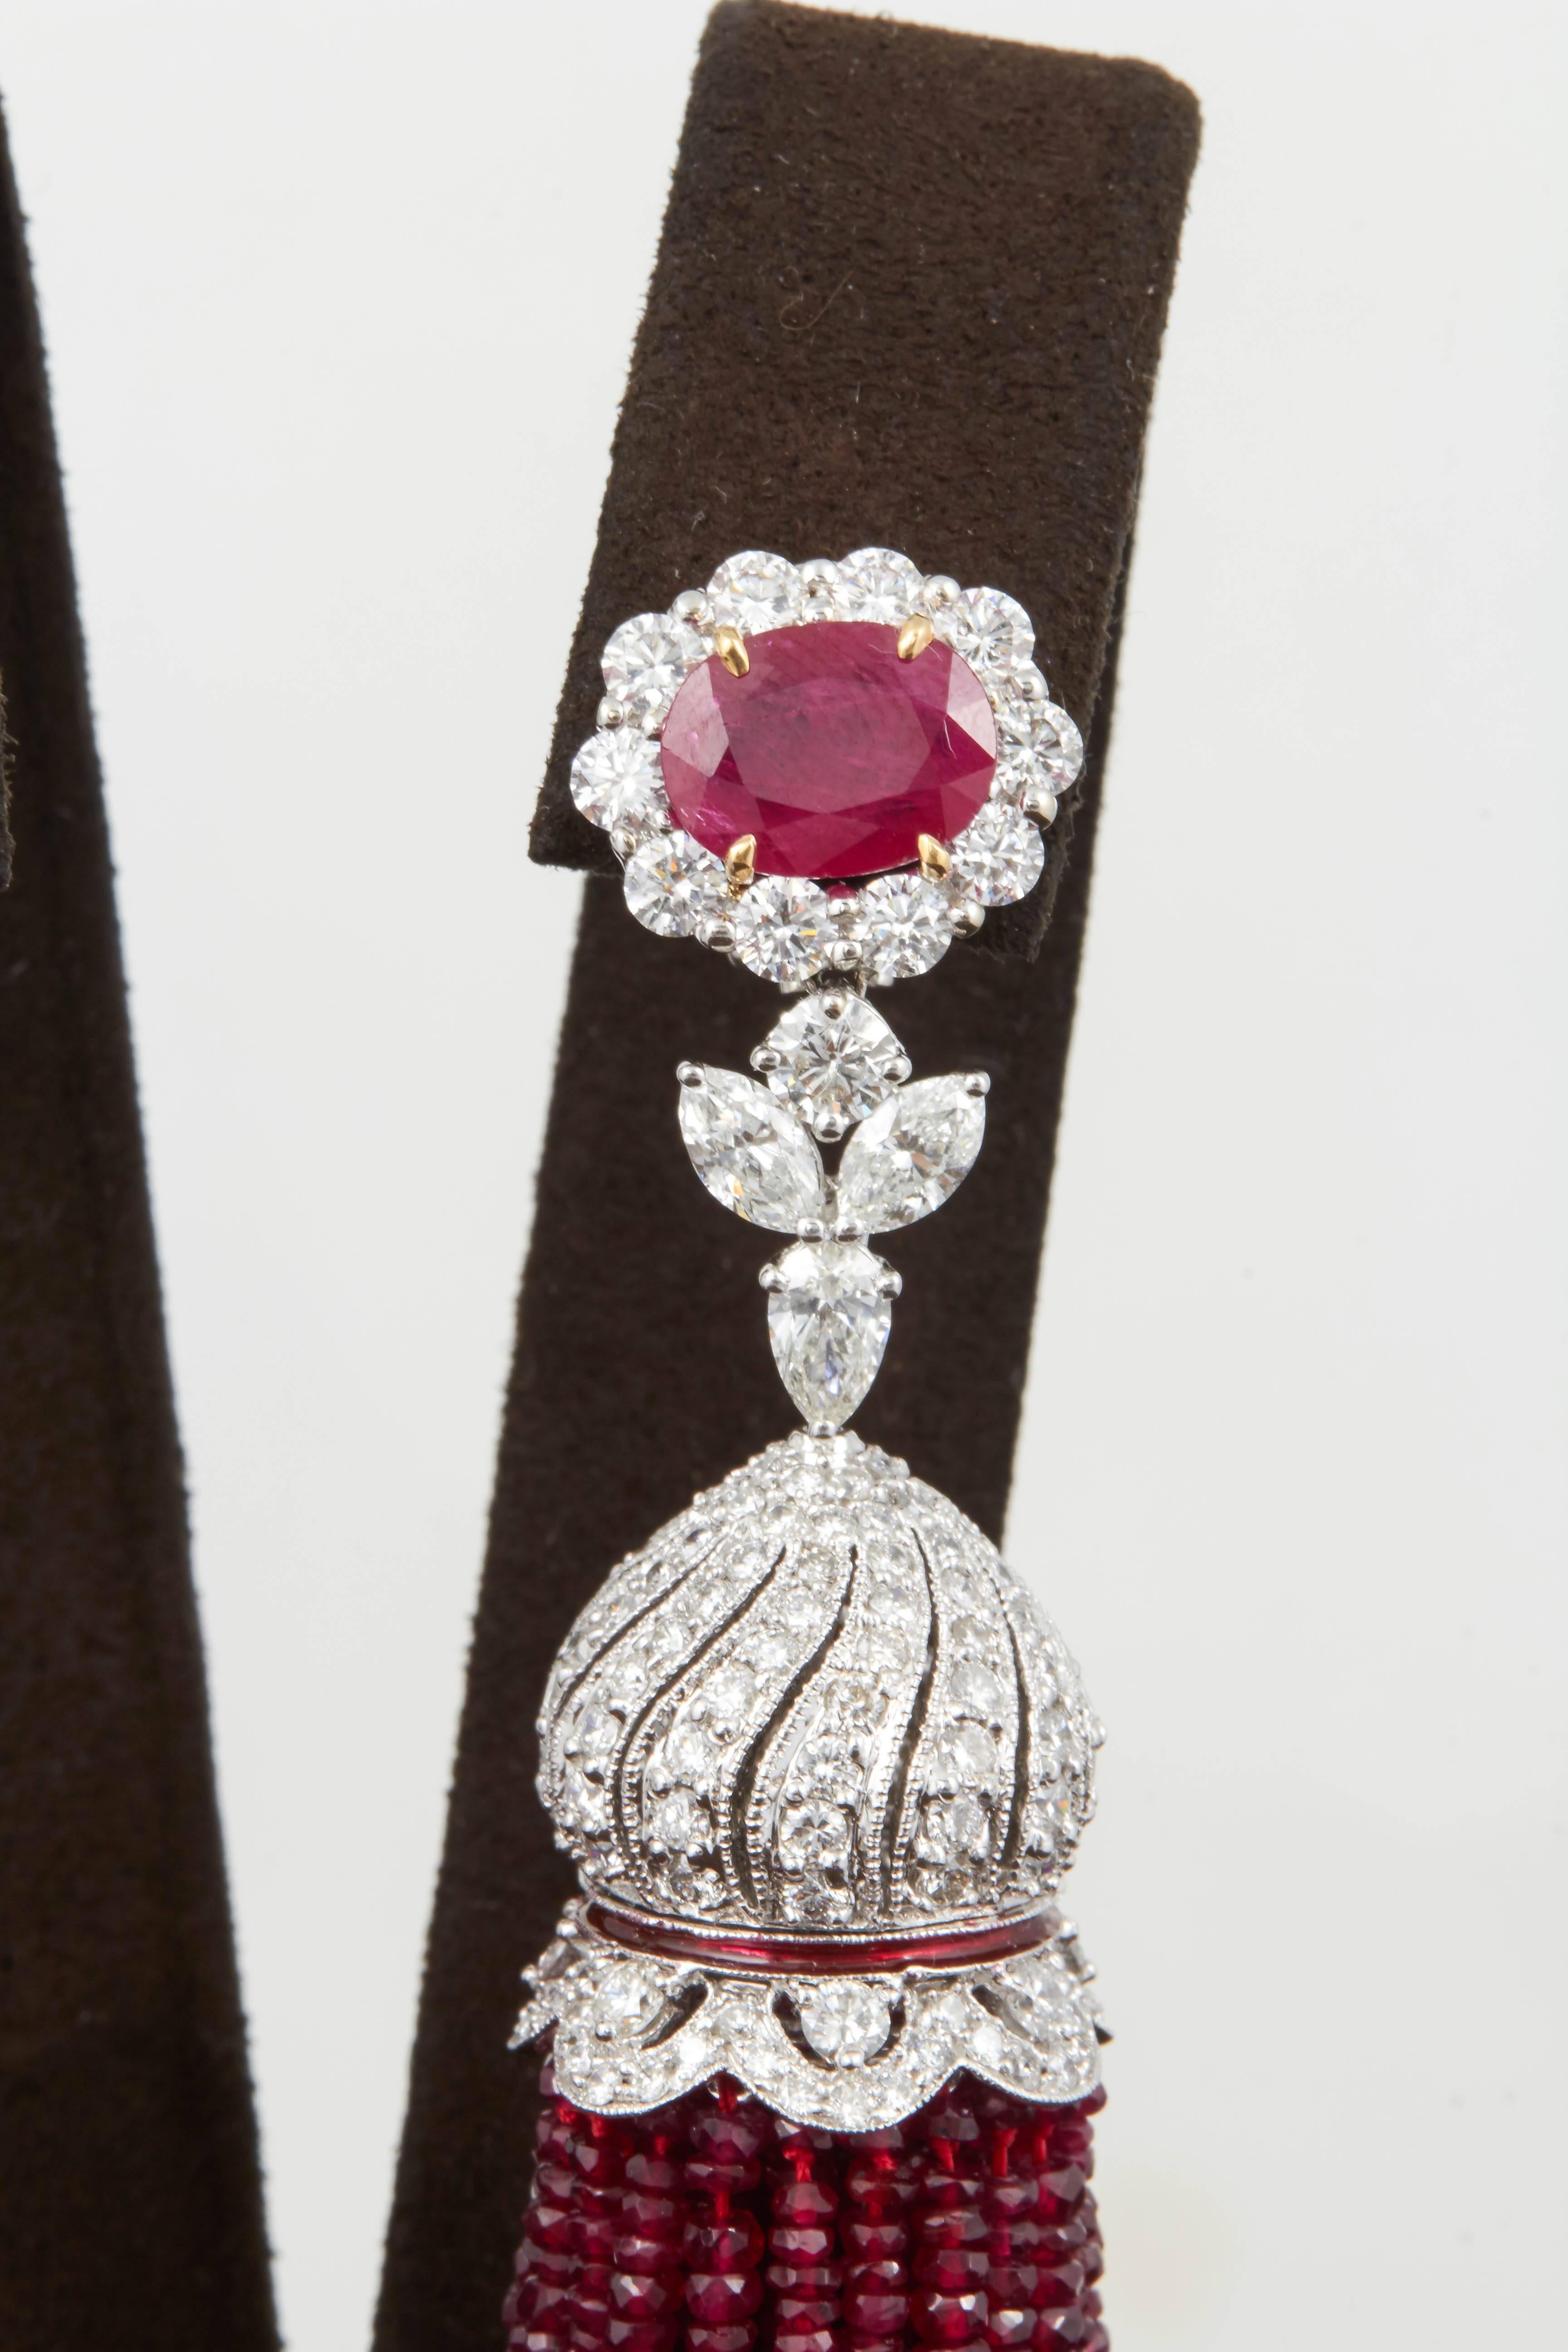 
Fabulous statement earrings! 

Over 500 carats of fine ruby! 13.85 carats of diamonds!

4.5 inches in length 

18k white gold 

A one of a kind earring that can be worn casually or to a black tie affair. 